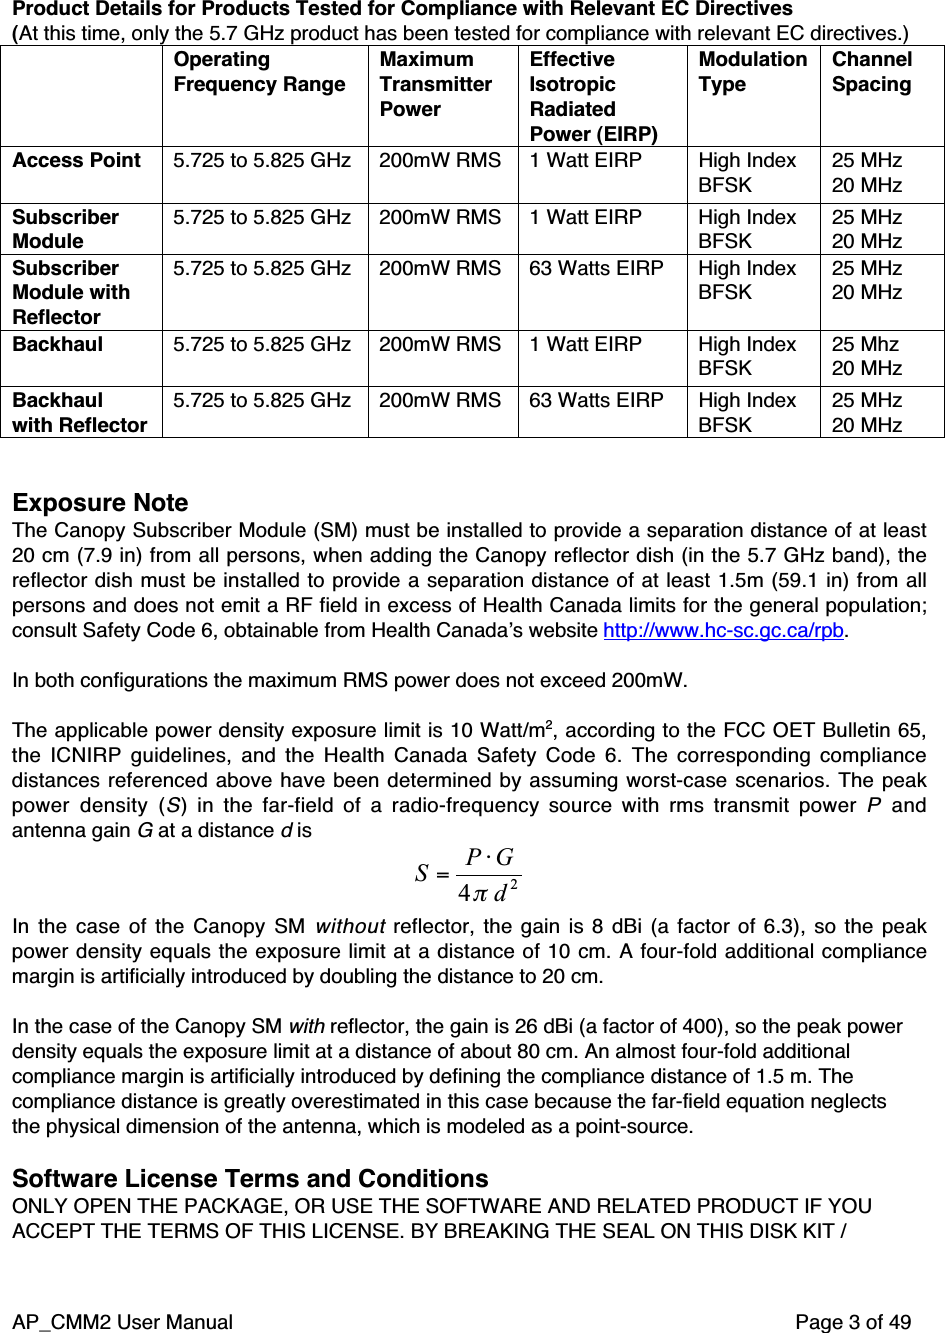 AP_CMM2 User Manual Page 3 of 49Product Details for Products Tested for Compliance with Relevant EC Directives(At this time, only the 5.7 GHz product has been tested for compliance with relevant EC directives.)OperatingFrequency RangeMaximumTransmitterPowerEffectiveIsotropicRadiatedPower (EIRP)ModulationTypeChannelSpacingAccess Point 5.725 to 5.825 GHz 200mW RMS 1 Watt EIRP High IndexBFSK25 MHz20 MHzSubscriberModule5.725 to 5.825 GHz 200mW RMS 1 Watt EIRP High IndexBFSK25 MHz20 MHzSubscriberModule withReflector5.725 to 5.825 GHz 200mW RMS 63 Watts EIRP High IndexBFSK25 MHz20 MHzBackhaul 5.725 to 5.825 GHz 200mW RMS 1 Watt EIRP High IndexBFSK25 Mhz20 MHzBackhaulwith Reflector5.725 to 5.825 GHz 200mW RMS 63 Watts EIRP High IndexBFSK25 MHz20 MHzExposure NoteThe Canopy Subscriber Module (SM) must be installed to provide a separation distance of at least20 cm (7.9 in) from all persons, when adding the Canopy reflector dish (in the 5.7 GHz band), thereflector dish must be installed to provide a separation distance of at least 1.5m (59.1 in) from allpersons and does not emit a RF field in excess of Health Canada limits for the general population;consult Safety Code 6, obtainable from Health Canada’s website http://www.hc-sc.gc.ca/rpb.In both configurations the maximum RMS power does not exceed 200mW.The applicable power density exposure limit is 10 Watt/m2, according to the FCC OET Bulletin 65,the ICNIRP guidelines, and the Health Canada Safety Code 6. The corresponding compliancedistances referenced above have been determined by assuming worst-case scenarios. The peakpower density (S) in the far-field of a radio-frequency source with rms transmit power P andantenna gain G at a distance d is24dGPSπ⋅=In the case of the Canopy SM without reflector, the gain is 8 dBi (a factor of 6.3), so the peakpower density equals the exposure limit at a distance of 10 cm. A four-fold additional compliancemargin is artificially introduced by doubling the distance to 20 cm.In the case of the Canopy SM with reflector, the gain is 26 dBi (a factor of 400), so the peak powerdensity equals the exposure limit at a distance of about 80 cm. An almost four-fold additionalcompliance margin is artificially introduced by defining the compliance distance of 1.5 m. Thecompliance distance is greatly overestimated in this case because the far-field equation neglectsthe physical dimension of the antenna, which is modeled as a point-source.Software License Terms and ConditionsONLY OPEN THE PACKAGE, OR USE THE SOFTWARE AND RELATED PRODUCT IF YOUACCEPT THE TERMS OF THIS LICENSE. BY BREAKING THE SEAL ON THIS DISK KIT /